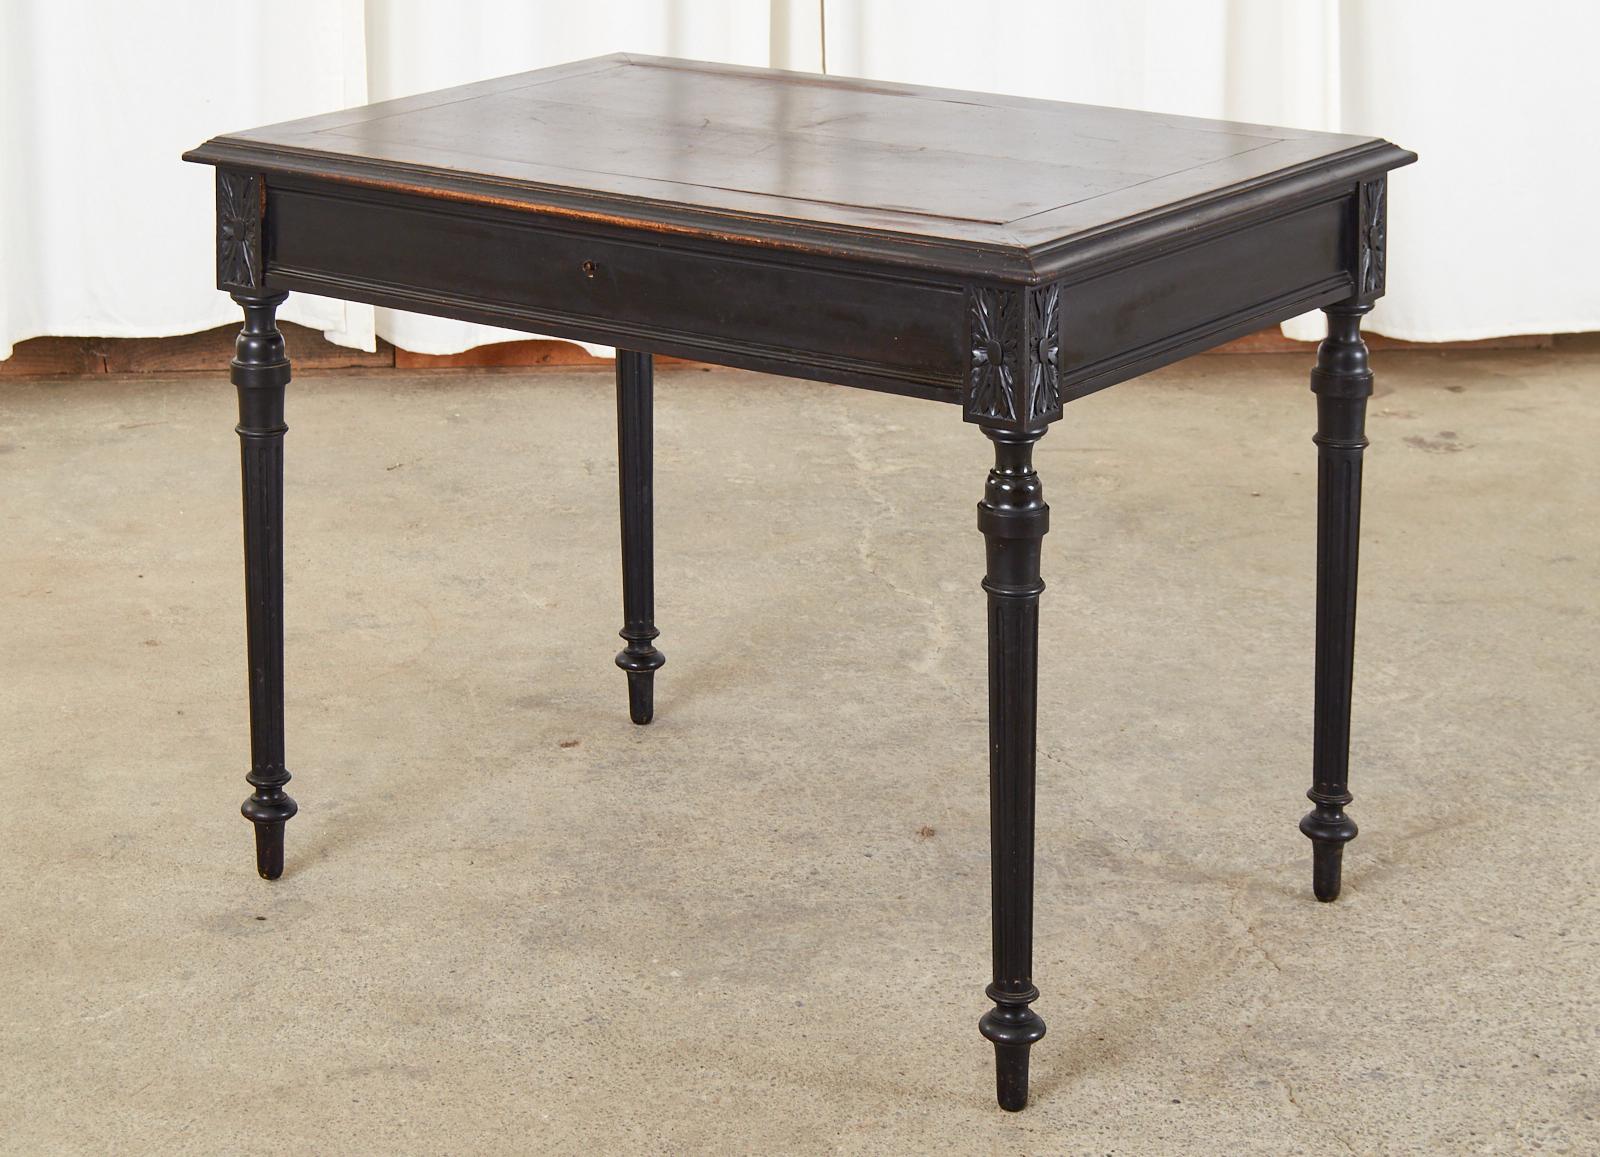 Dramatic French diminutive ladies writing table or desk featuring a black lacquer ebonized finish. Made in the neoclassical Louis XVI taste with a simple clean design and minimal decorative embellishments. The case has an ogee edge on the top and is